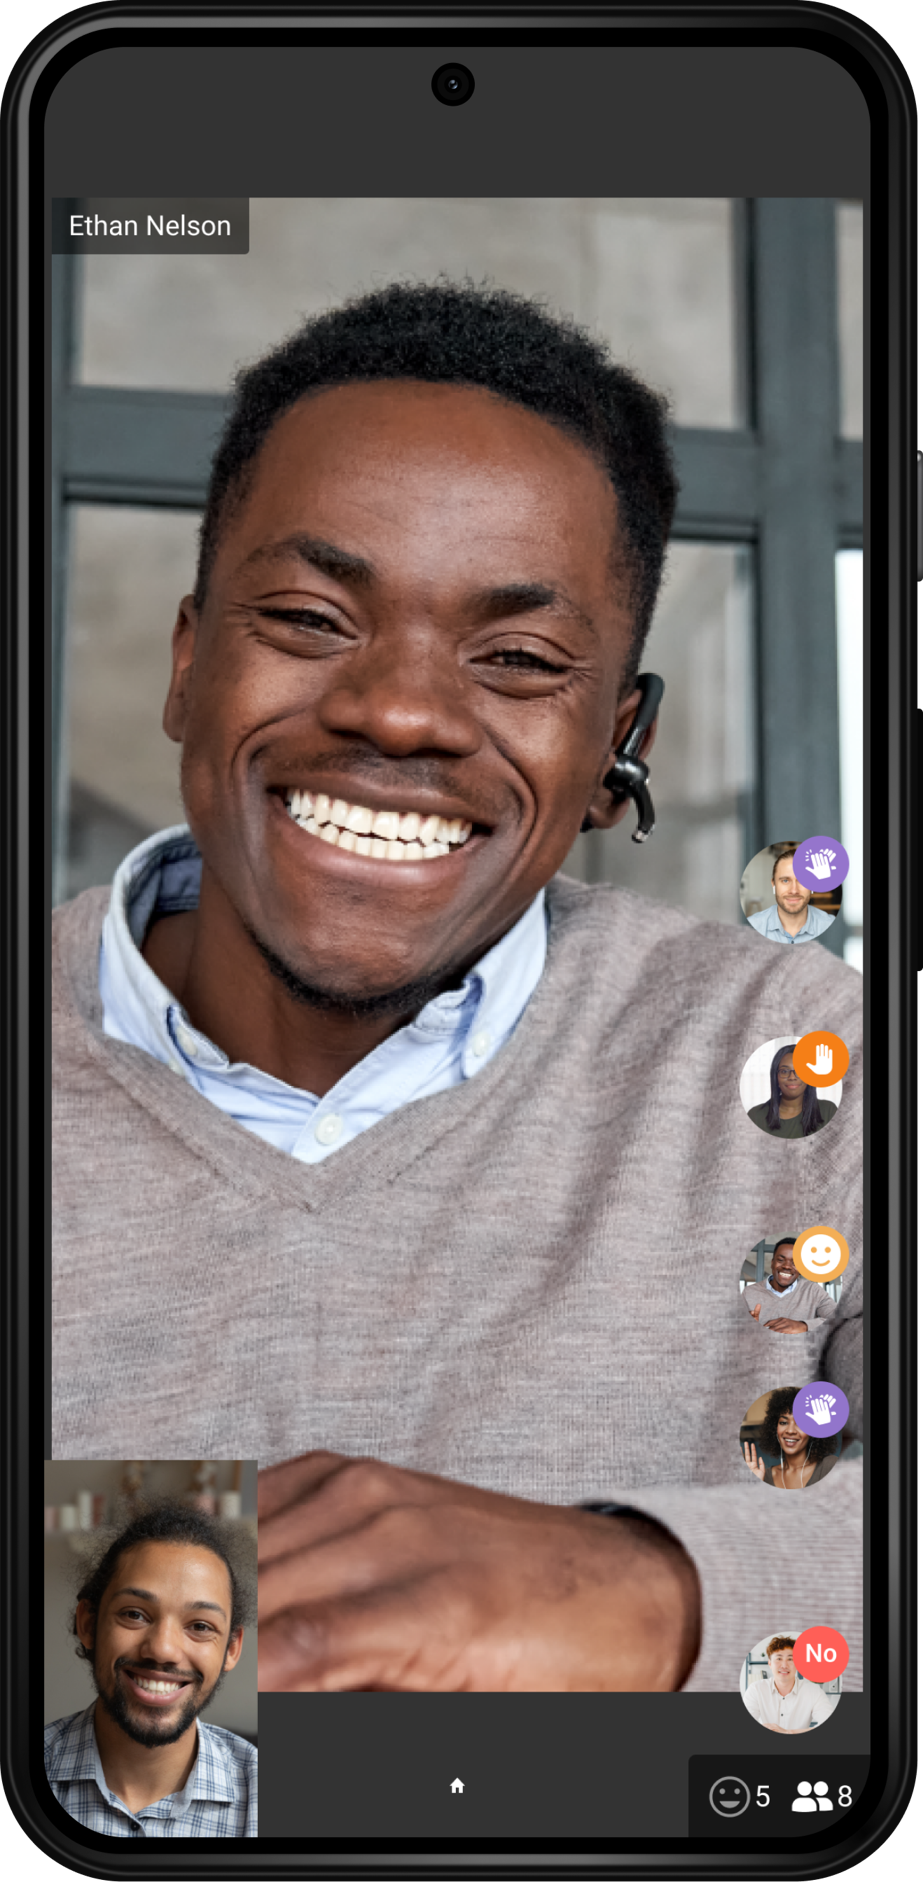 TrueConf 2.0 for Android: the all-in-one video conferencing & team messaging app 37